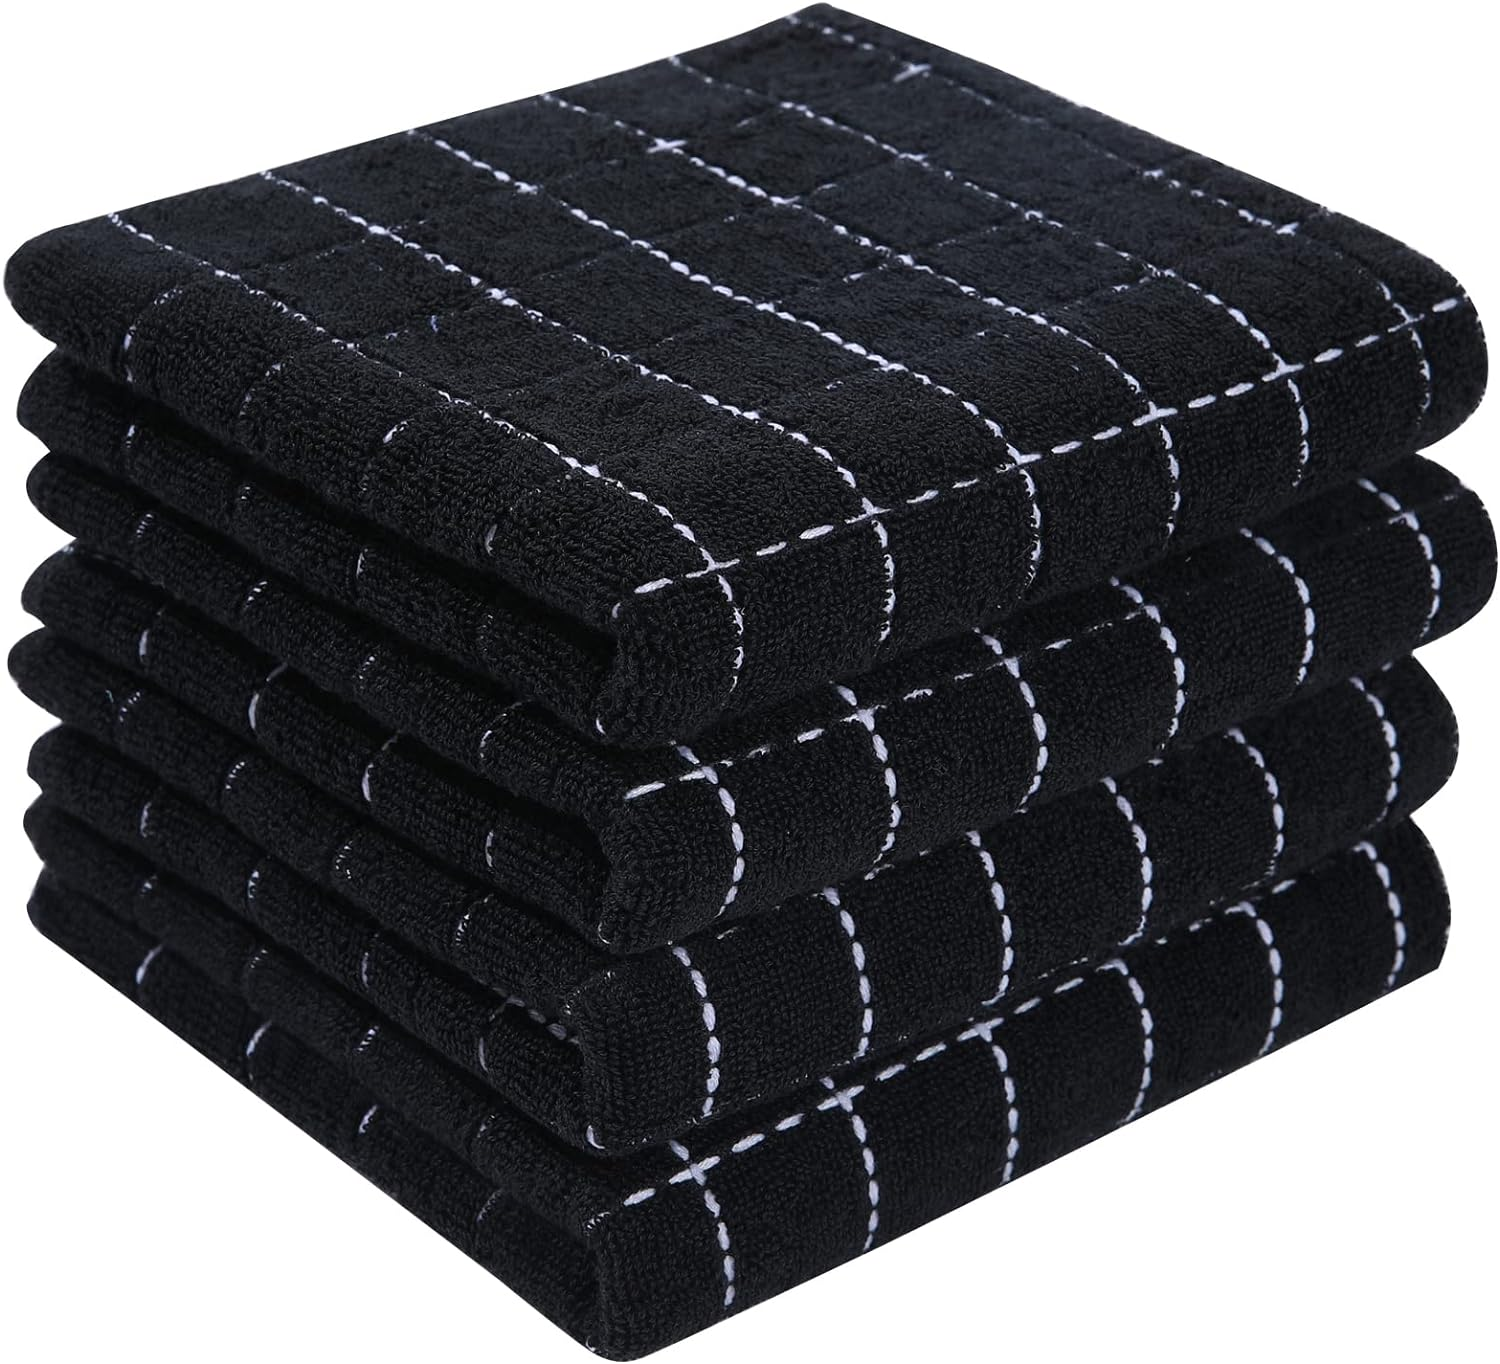 Homaxy 100% Cotton Terry Kitchen Towels(Black, 13 x 28 inches), Checkered Designed, Soft and Super Absorbent Dish Towels, 4 Pack : Home & Kitchen $6.99 at Homaxy via Amazon